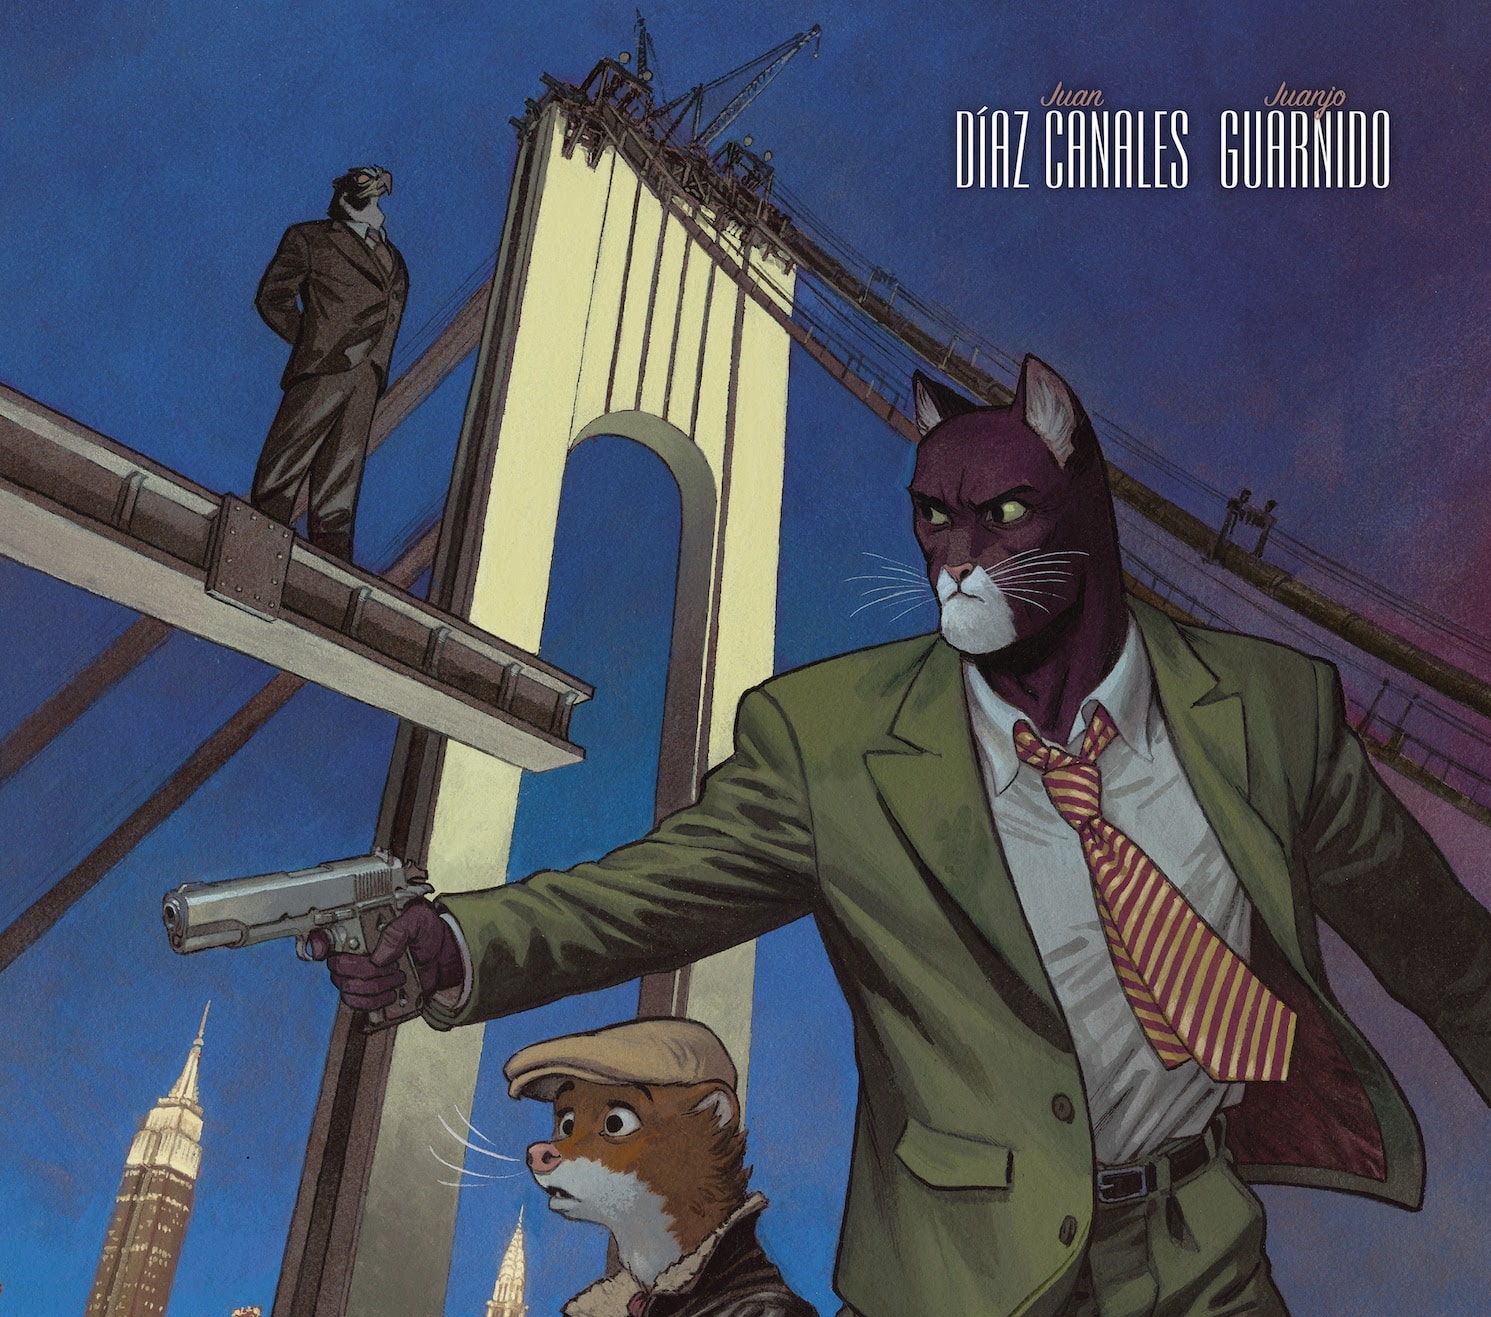 'Blacksad: They All Fall Down' announced for July 2022